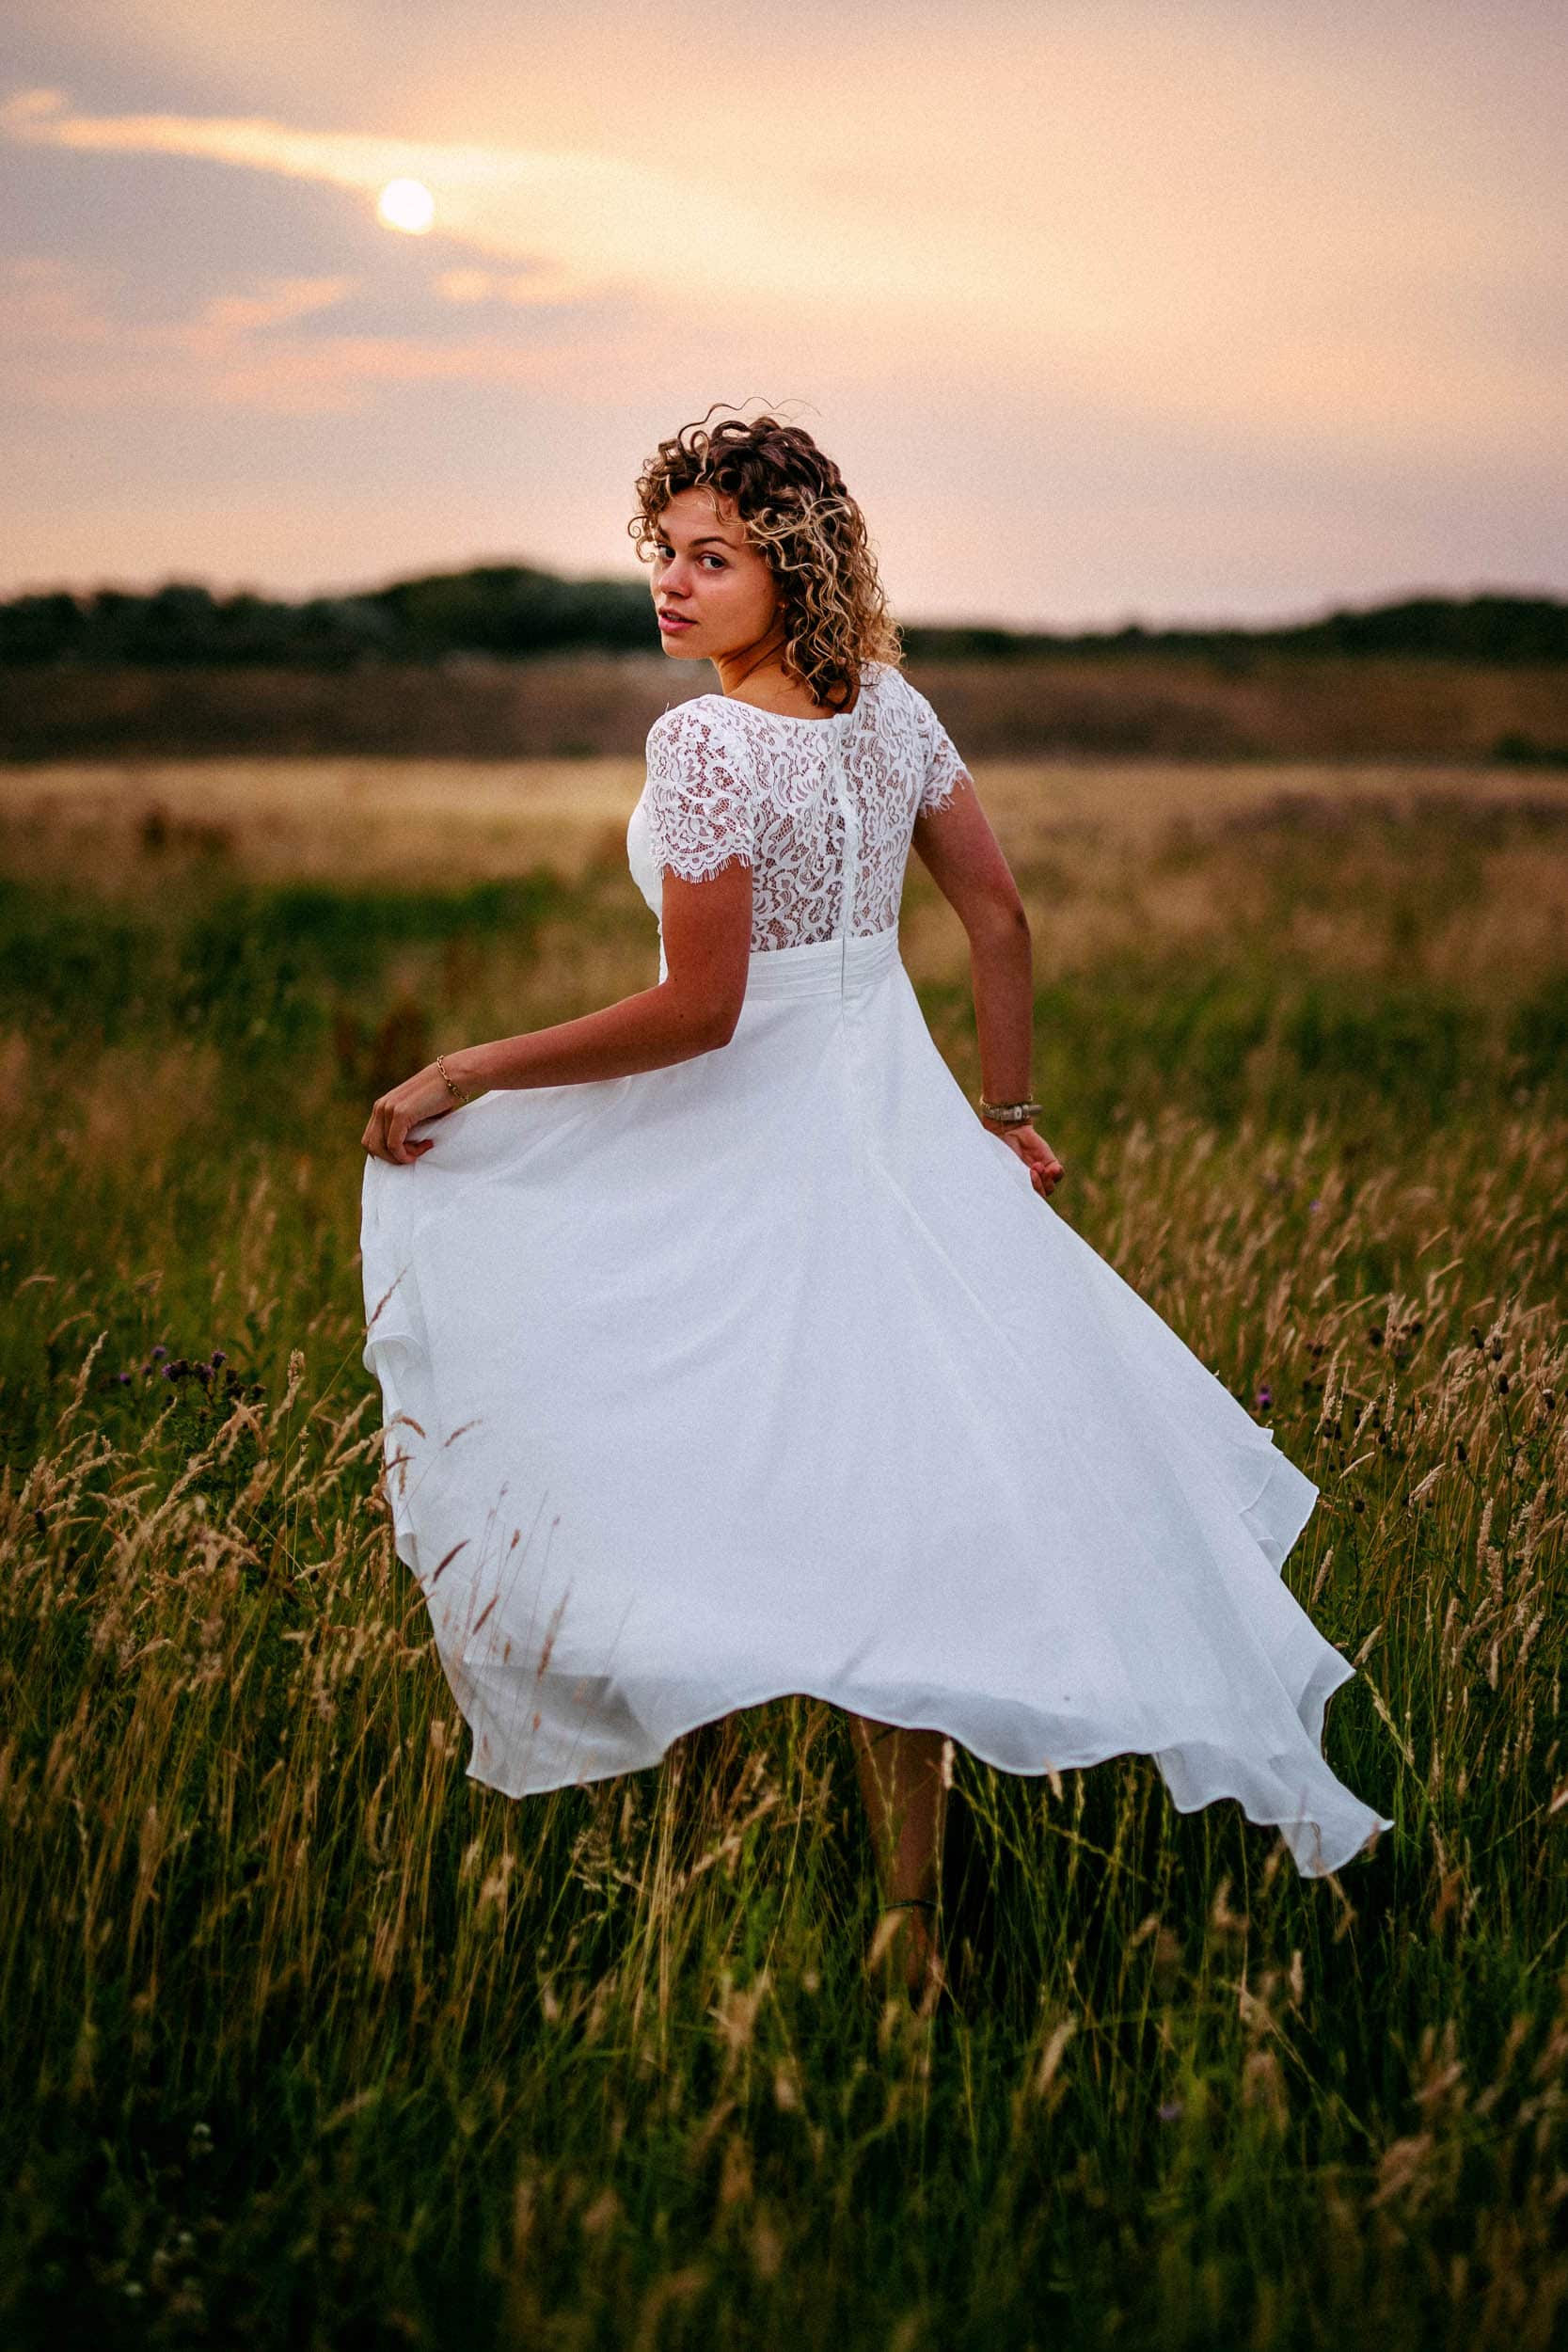 A Trash The Dress session with a woman in a white dress standing gracefully amid a picturesque field.